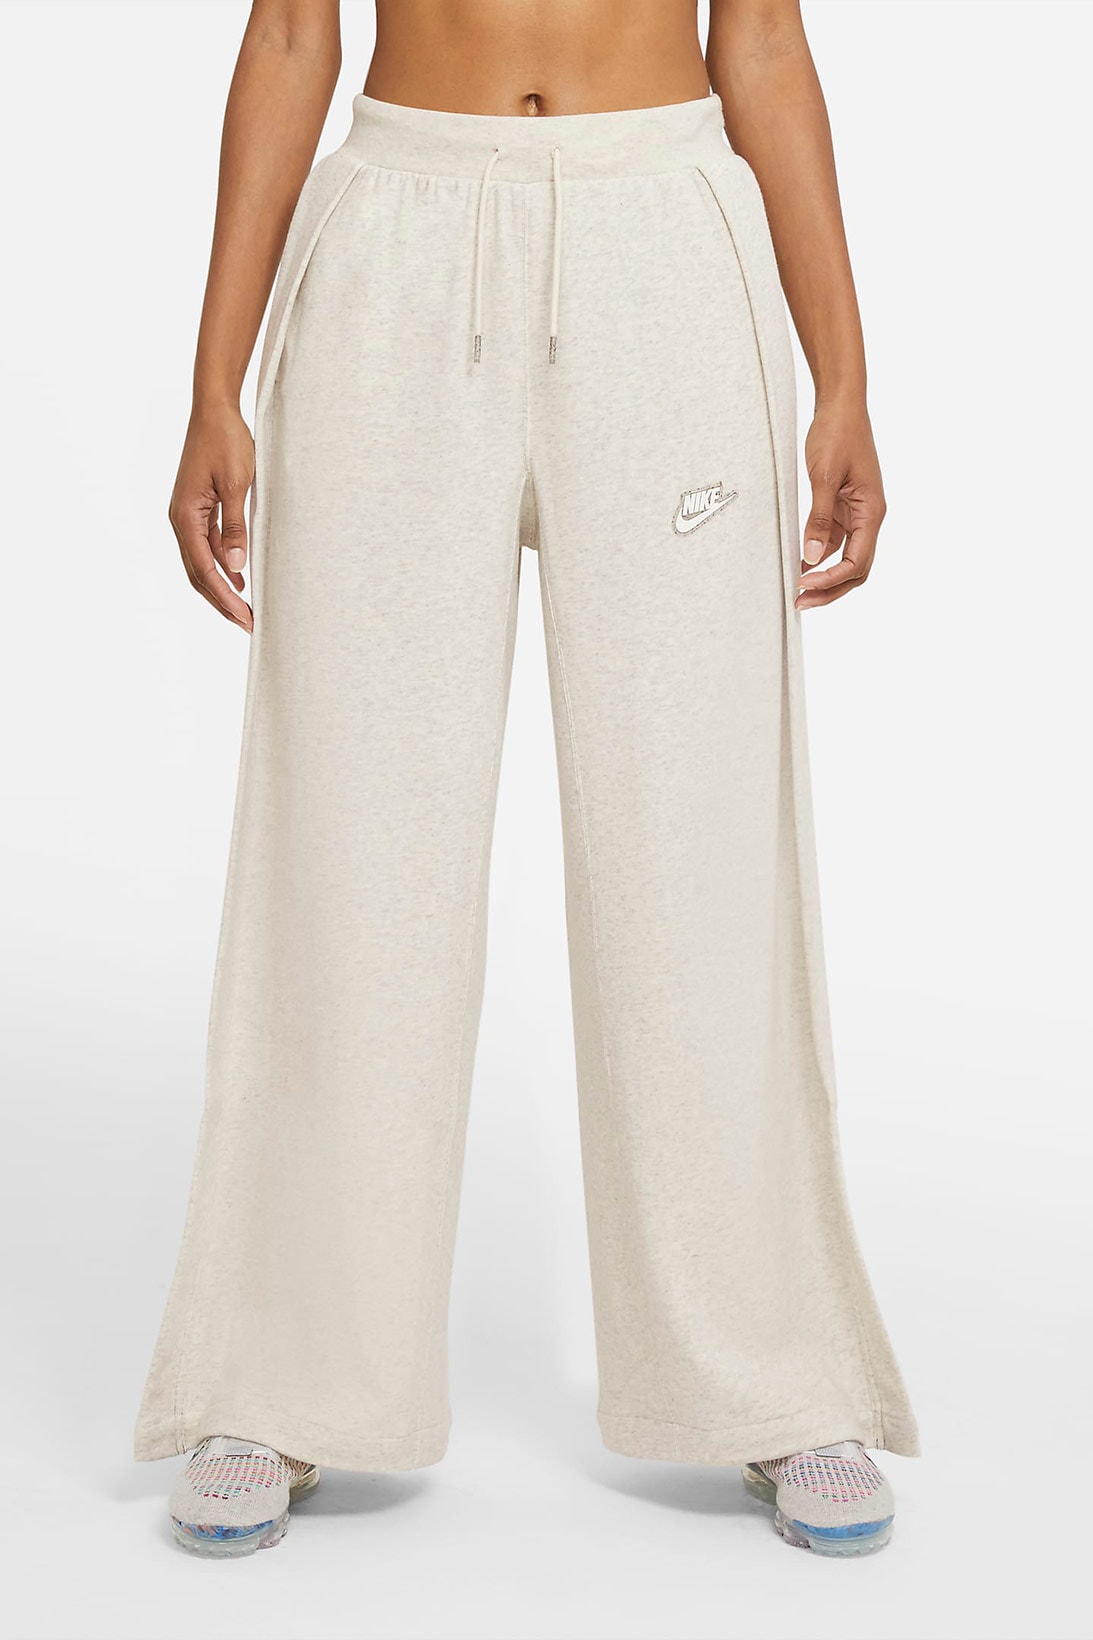 nike sportswear womens french terry trousers wide leg sweatpants sustainable oatmeal heather white front